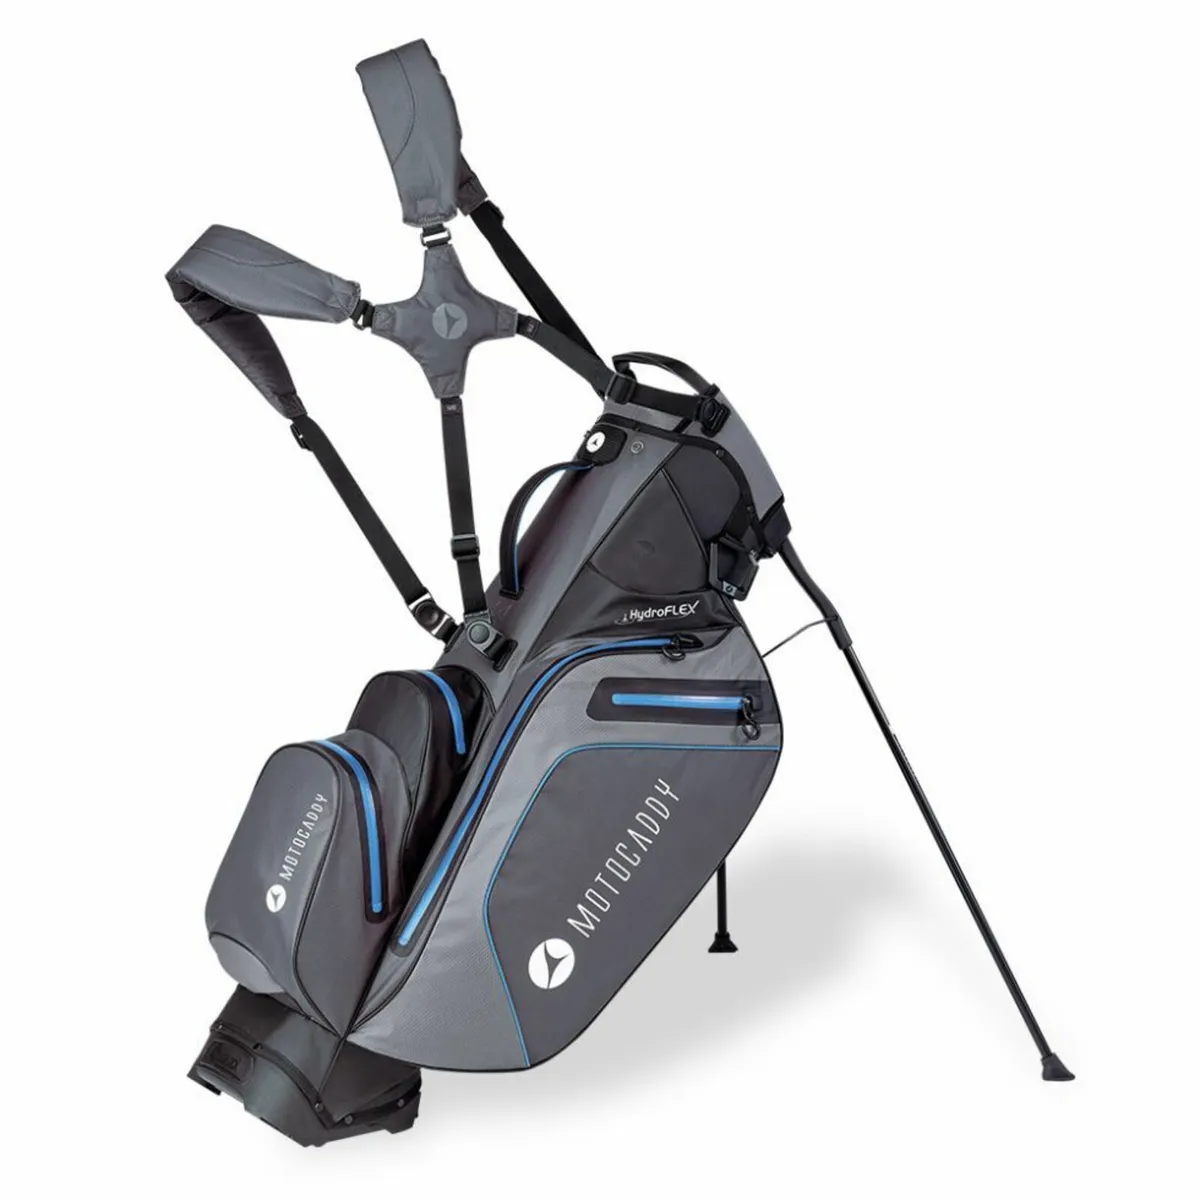 New Motocaddy Hydroflex bags limited numbers